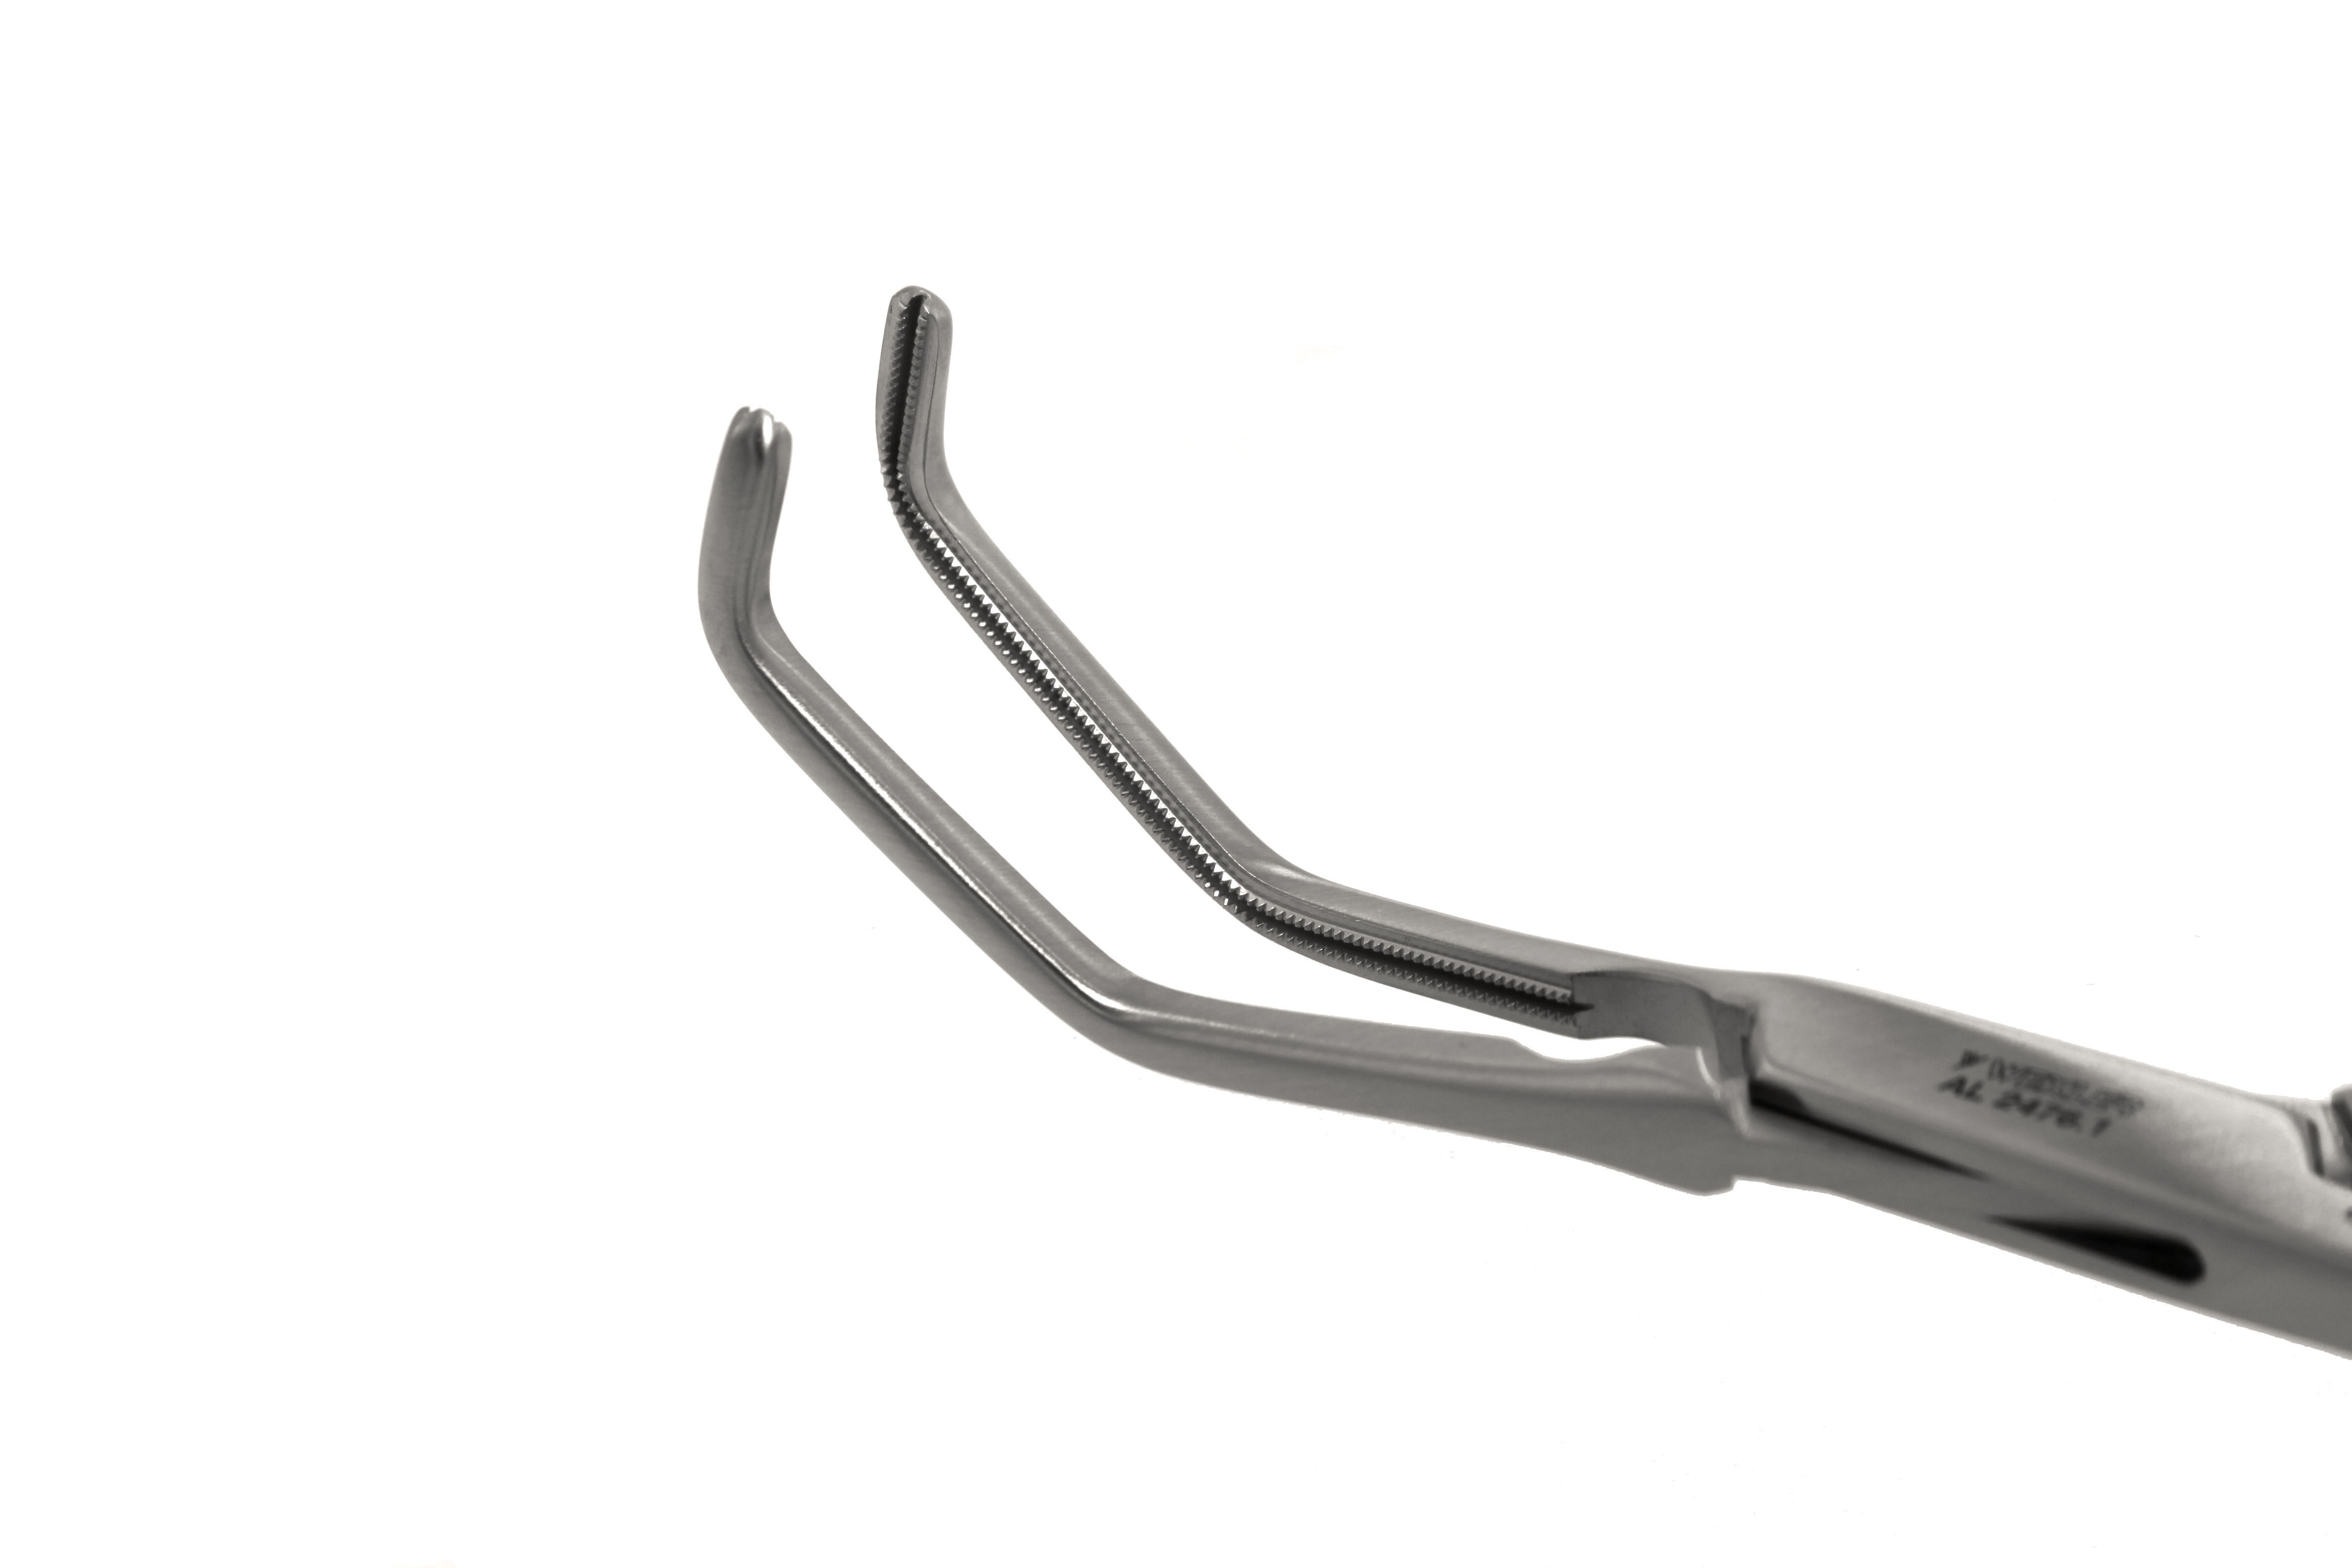 Tangential Occlusion Clamp - 27mm DeBakey Atraumatic jaws